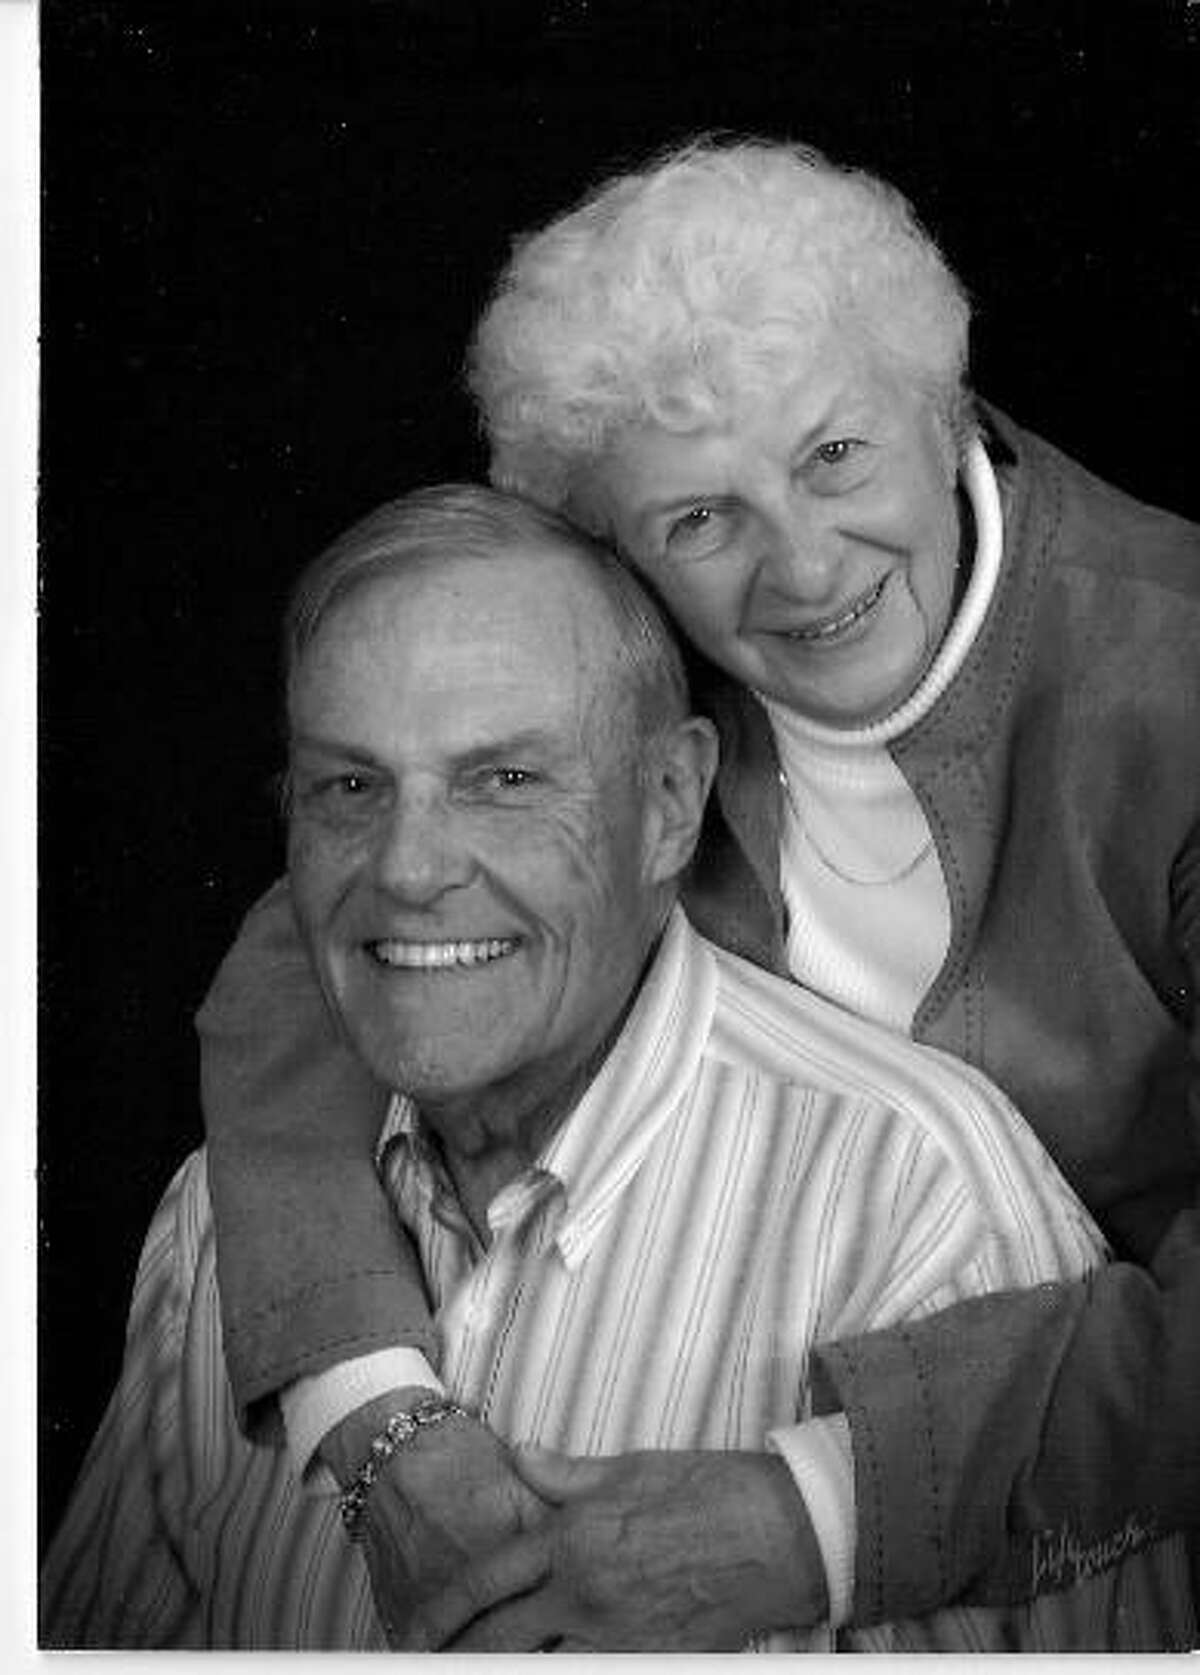 Bill and Martha McCart of Shelton, married in Cape Girardeau, Missouri, celebrated their 65th Wedding Anniversary on August 25th.